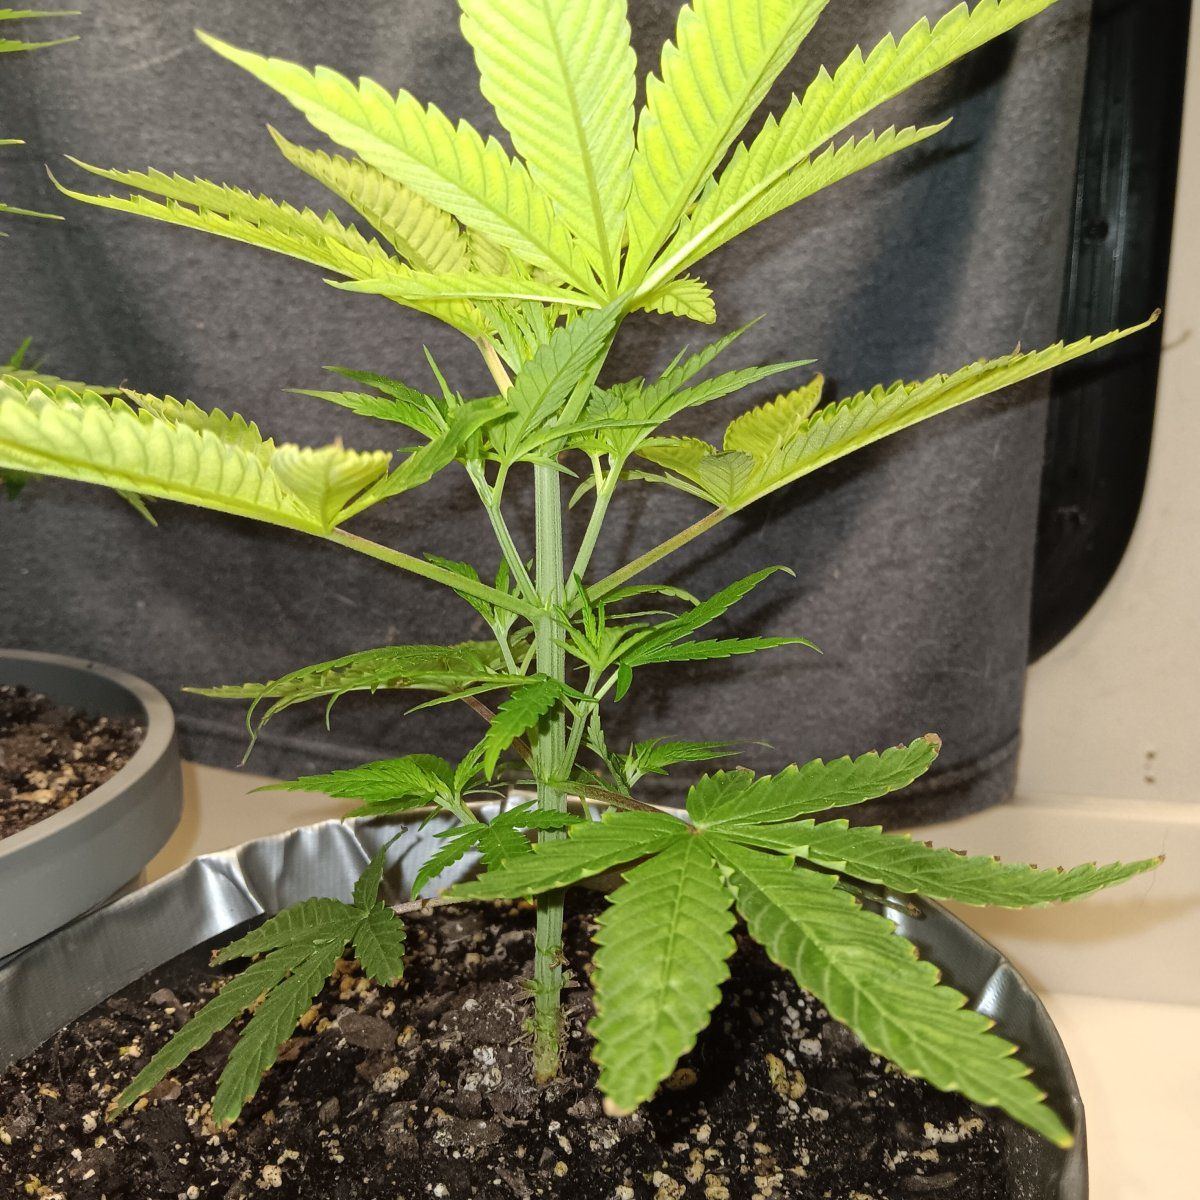 Any help would be appreciated new grower here having a color issue with one plant being too li 4